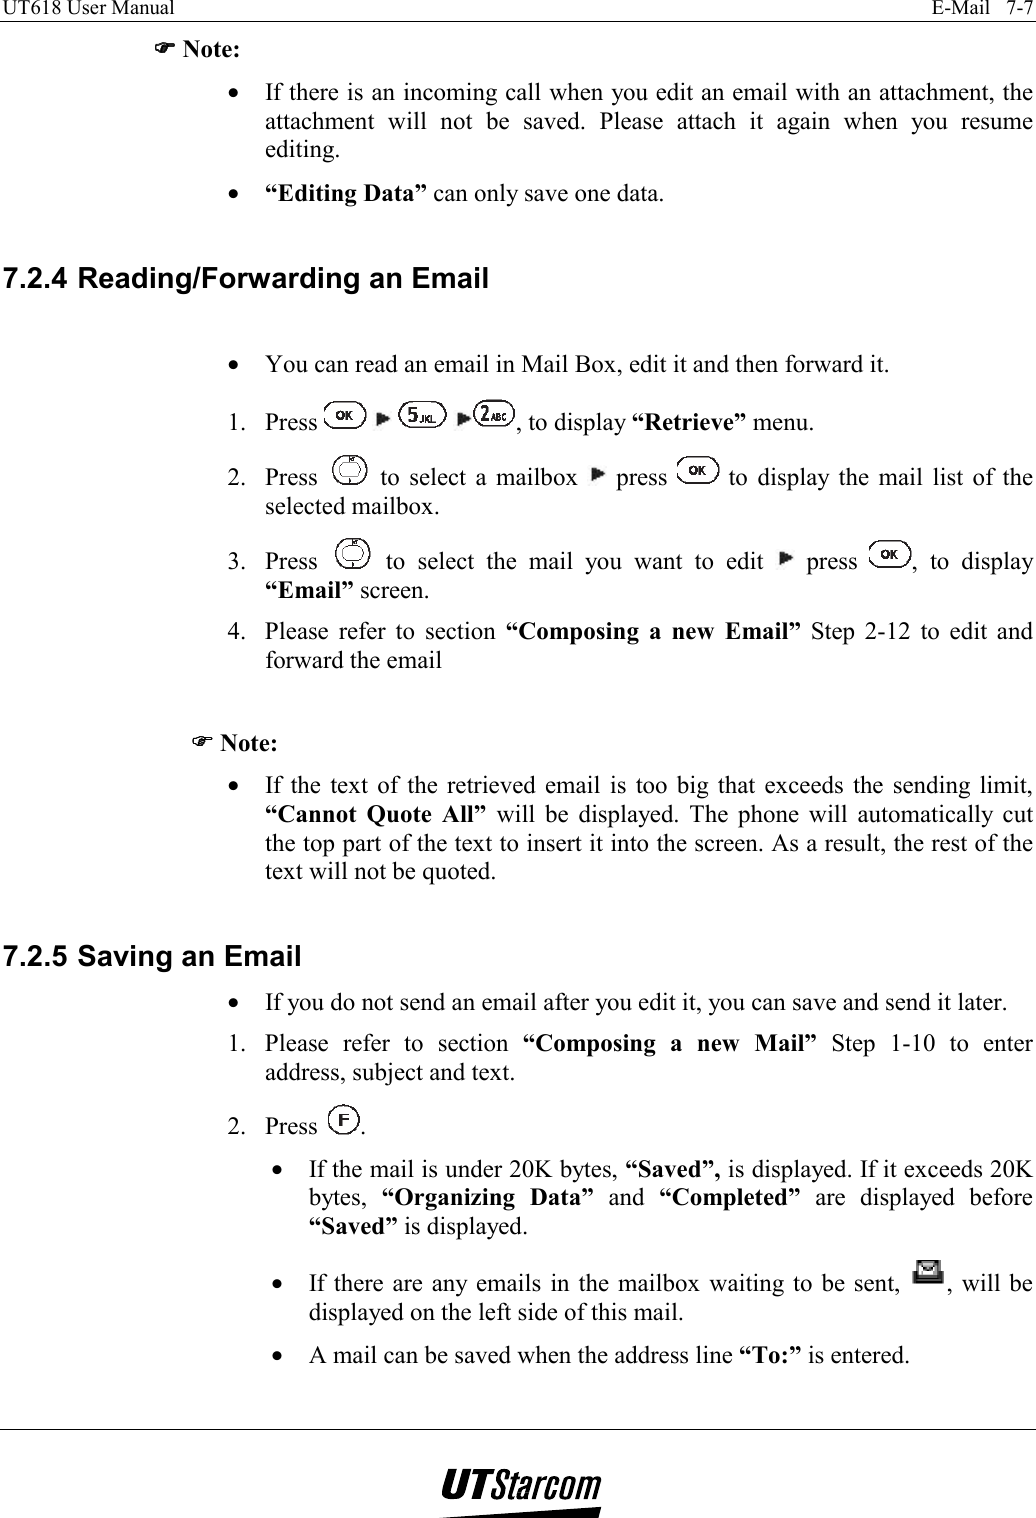 UT618 User Manual    E-Mail   7-7   )))) Note: •  If there is an incoming call when you edit an email with an attachment, the attachment will not be saved. Please attach it again when you resume editing. •  “Editing Data” can only save one data.  7.2.4 Reading/Forwarding an Email  •  You can read an email in Mail Box, edit it and then forward it. 1. Press        , to display “Retrieve” menu. 2. Press   to select a mailbox   press   to display the mail list of the selected mailbox. 3. Press   to select the mail you want to edit   press  , to display “Email” screen. 4.  Please refer to section “Composing a new Email” Step 2-12 to edit and forward the email  )))) Note: •  If the text of the retrieved email is too big that exceeds the sending limit, “Cannot Quote All” will be displayed. The phone will automatically cut the top part of the text to insert it into the screen. As a result, the rest of the text will not be quoted.  7.2.5 Saving an Email •  If you do not send an email after you edit it, you can save and send it later. 1.  Please refer to section “Composing a new Mail” Step 1-10 to enter address, subject and text. 2. Press  . •  If the mail is under 20K bytes, “Saved”, is displayed. If it exceeds 20K bytes,  “Organizing Data” and “Completed” are displayed before “Saved” is displayed. •  If there are any emails in the mailbox waiting to be sent,  , will be displayed on the left side of this mail. •  A mail can be saved when the address line “To:” is entered.  